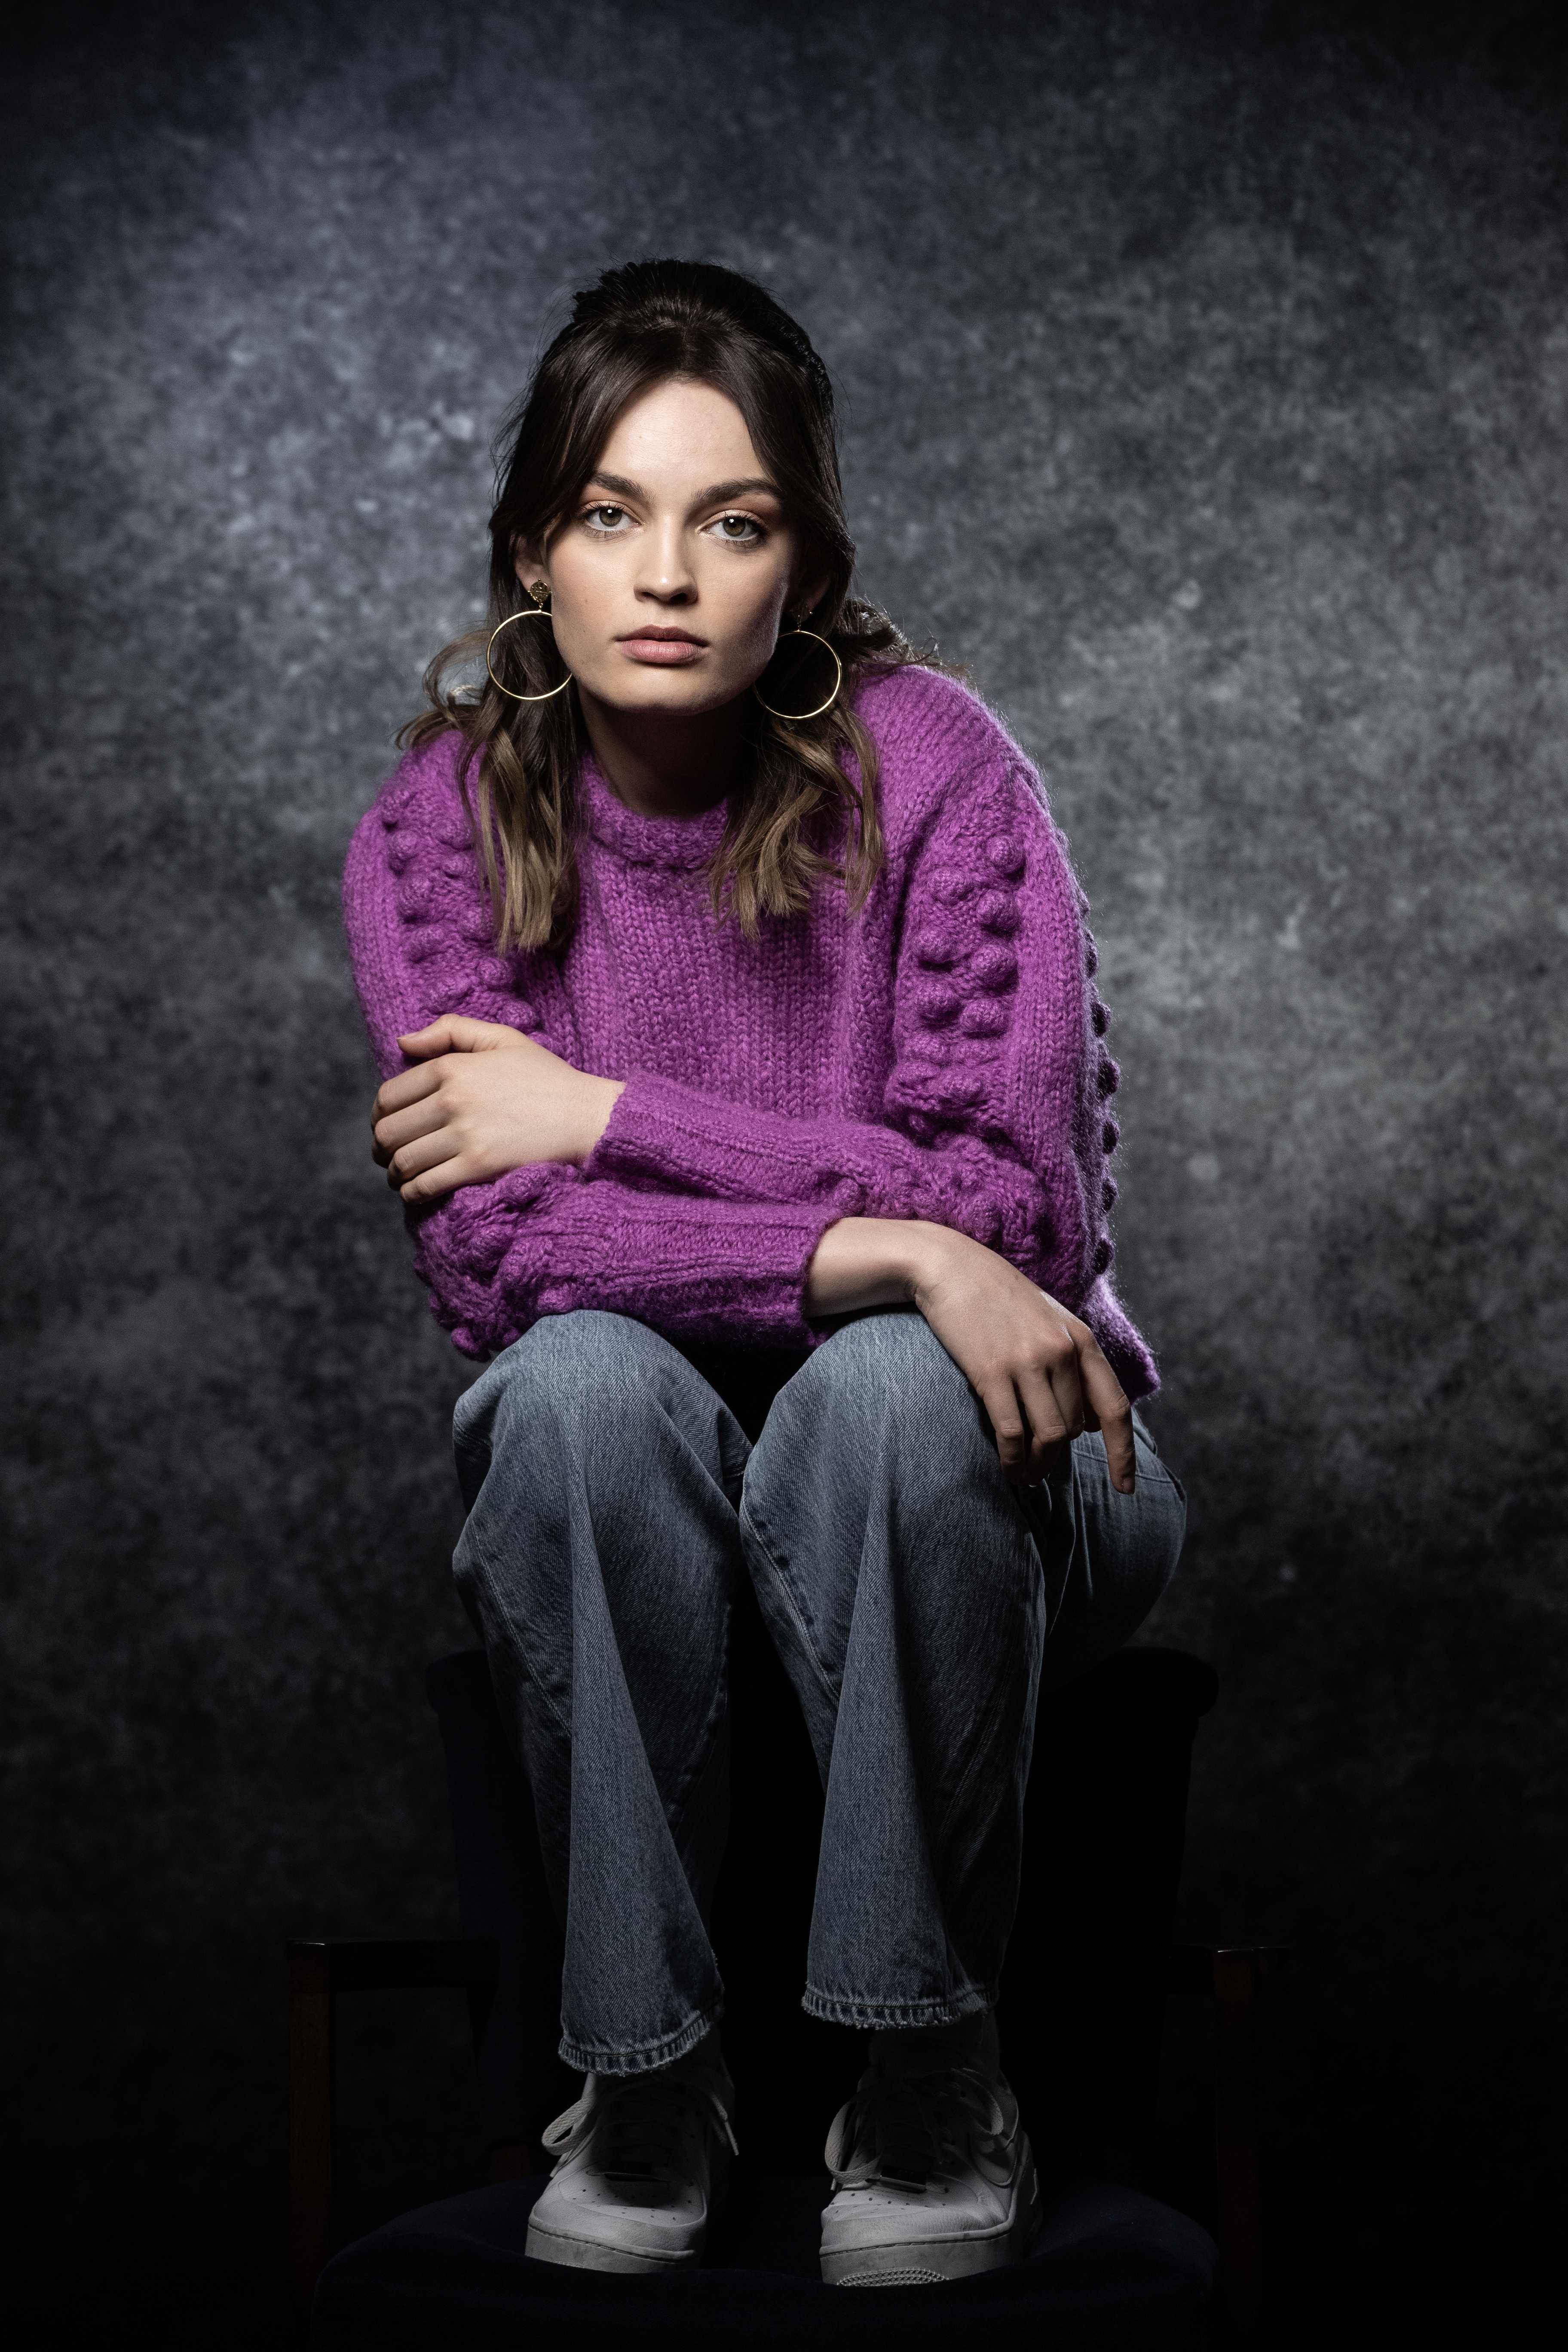 A Studio Portrait Of The Actress, Emma Mackey, Wearing A Distinct Purple Sweater While Sitting On A Chair